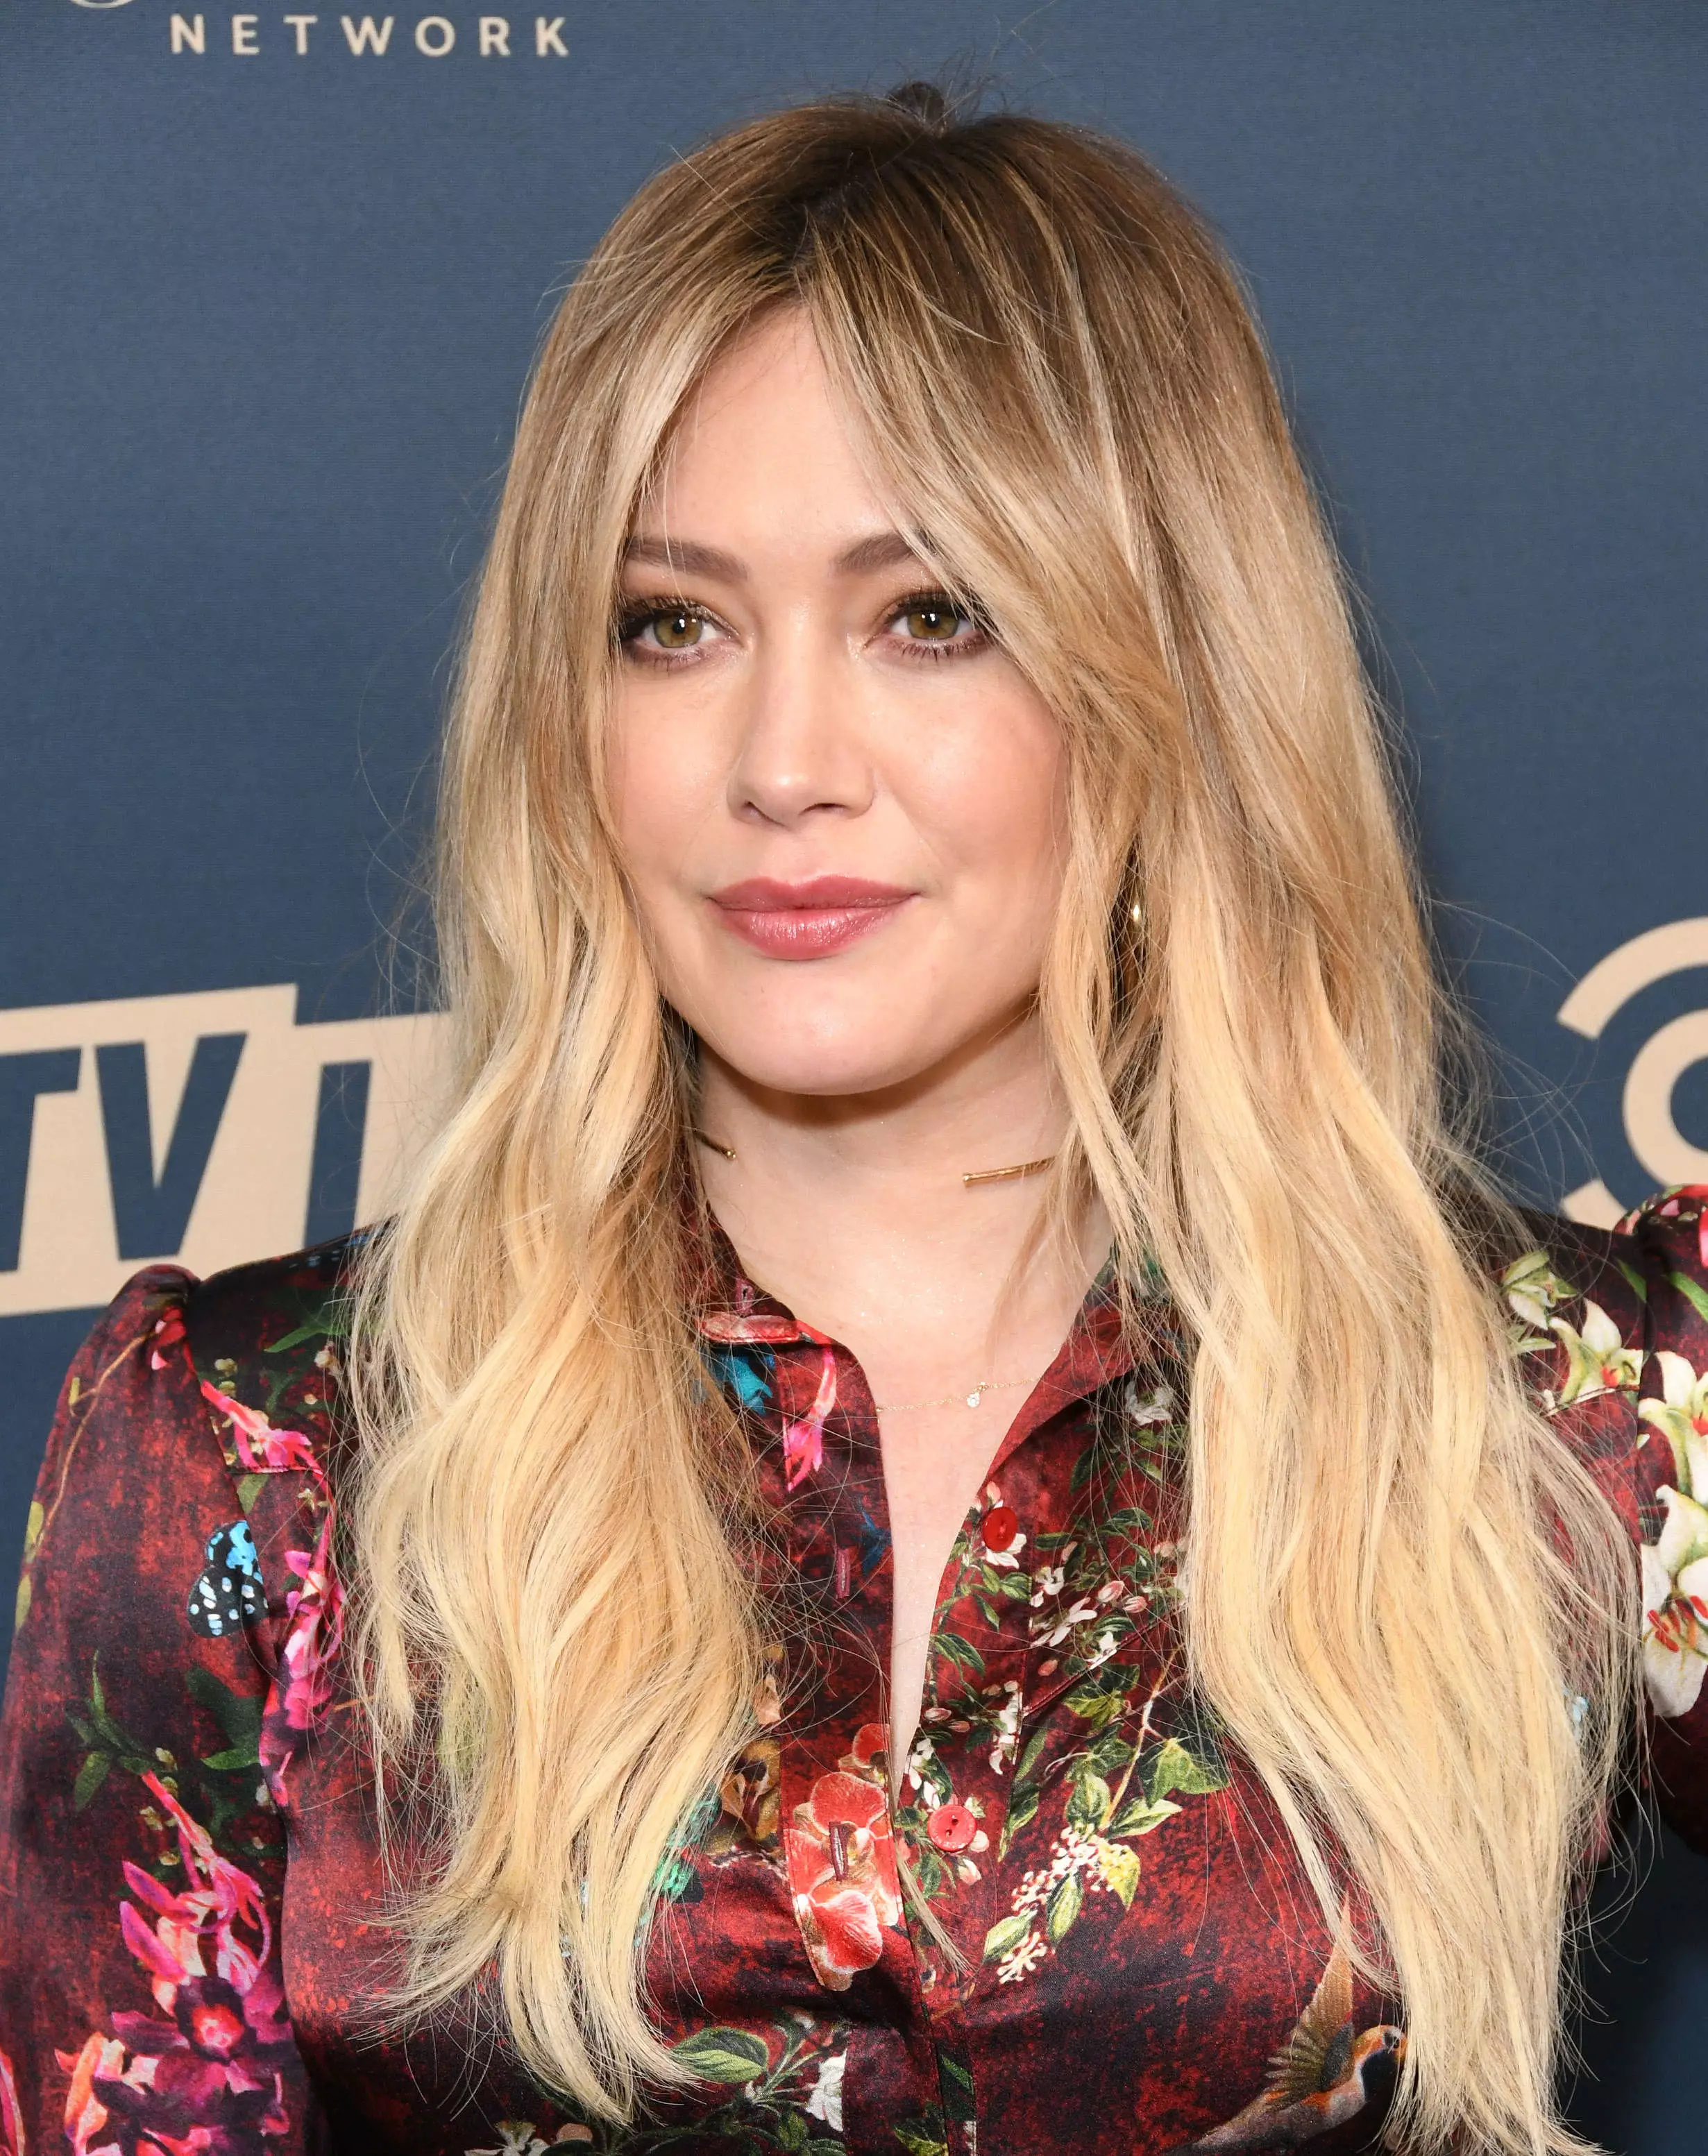 Hilary Duff, who was nothing to do with this, we assume.